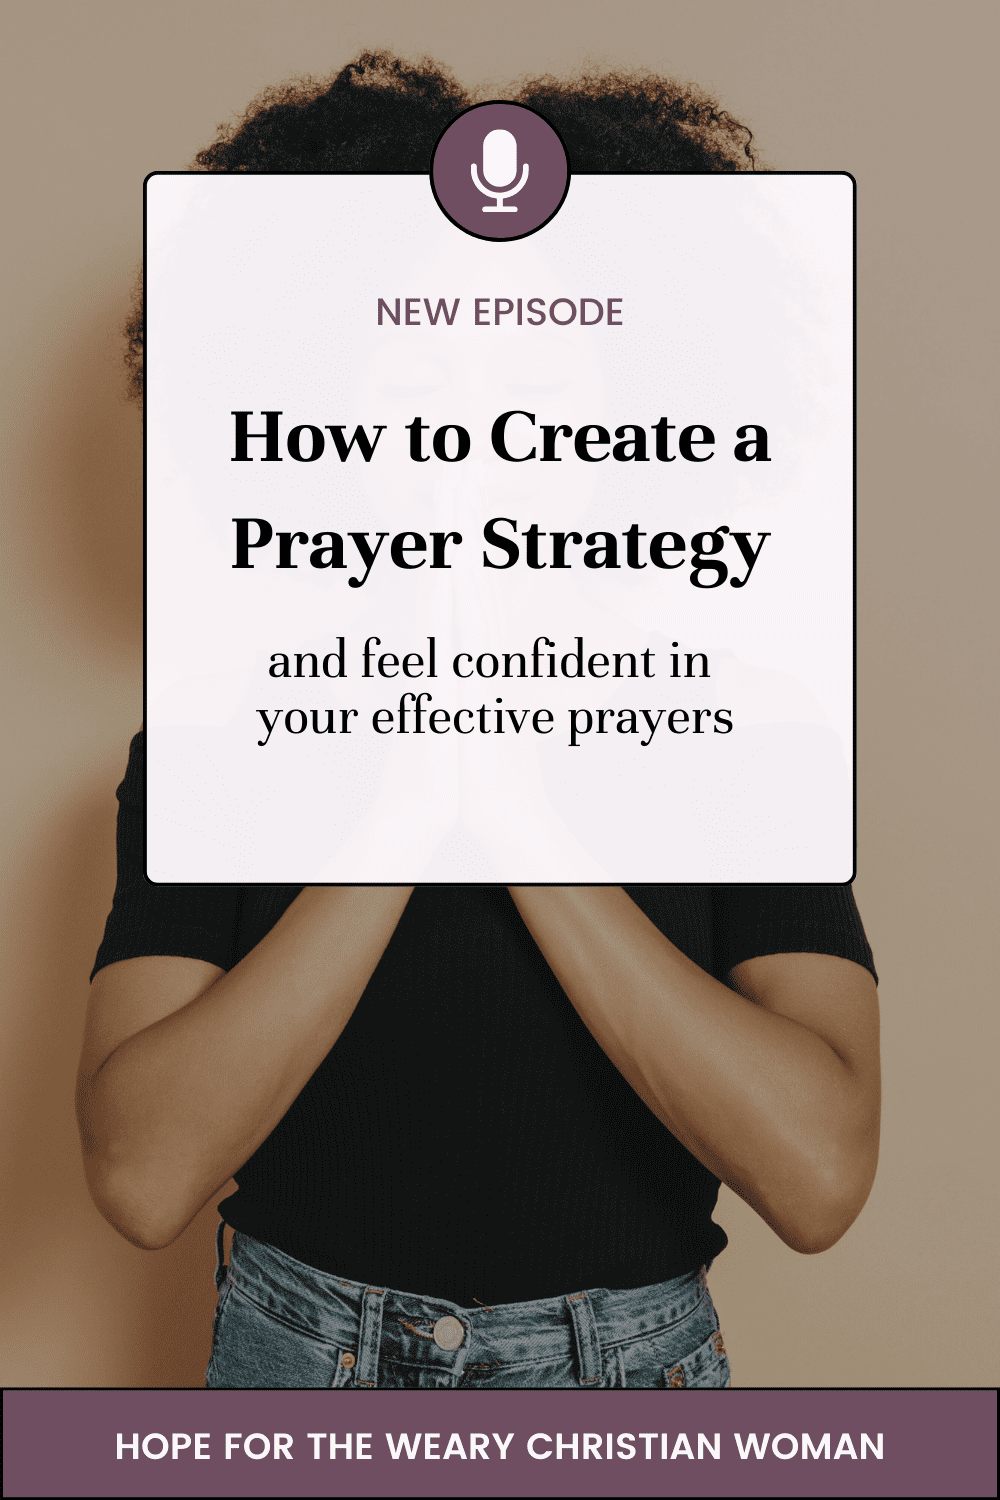 Are you ready to learn how to pray effectively? Learn how to create a prayer strategy so that you can be confident in your prayers, hear from God during hard times, and trust God's plan and timing.